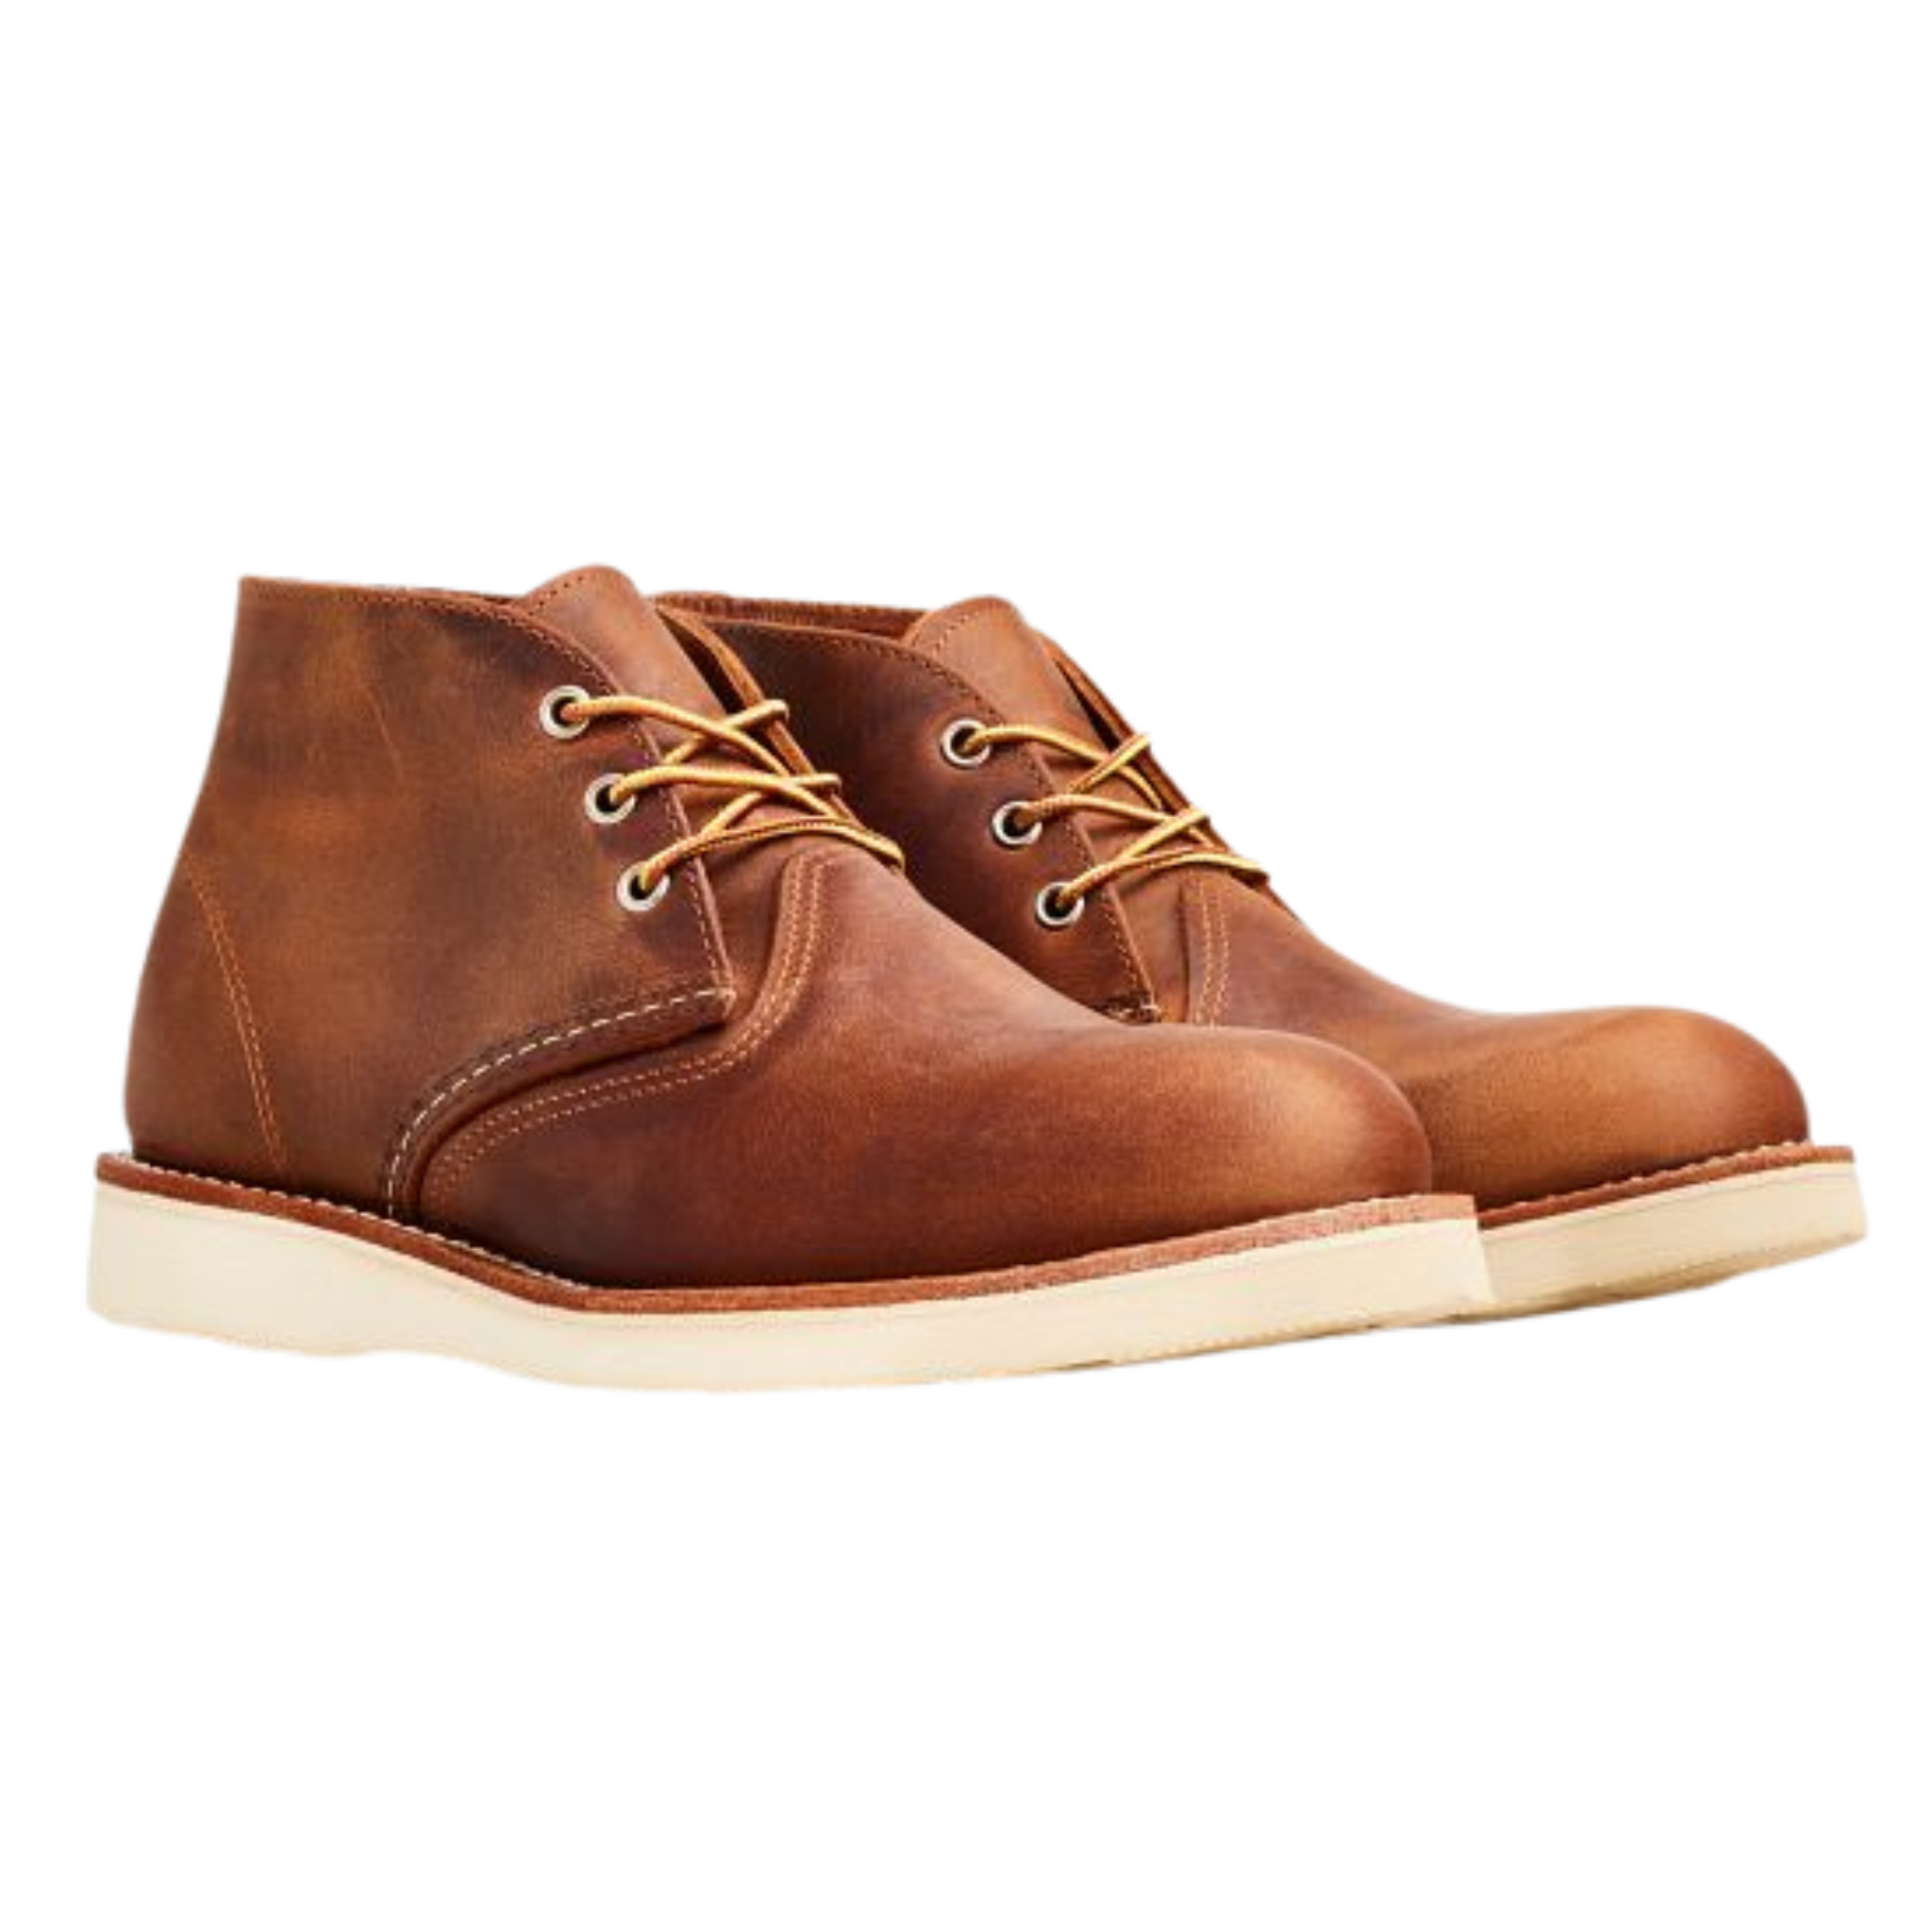 Red Wing Work Chukka Copper 3137 size 10.5 LAST PAIR